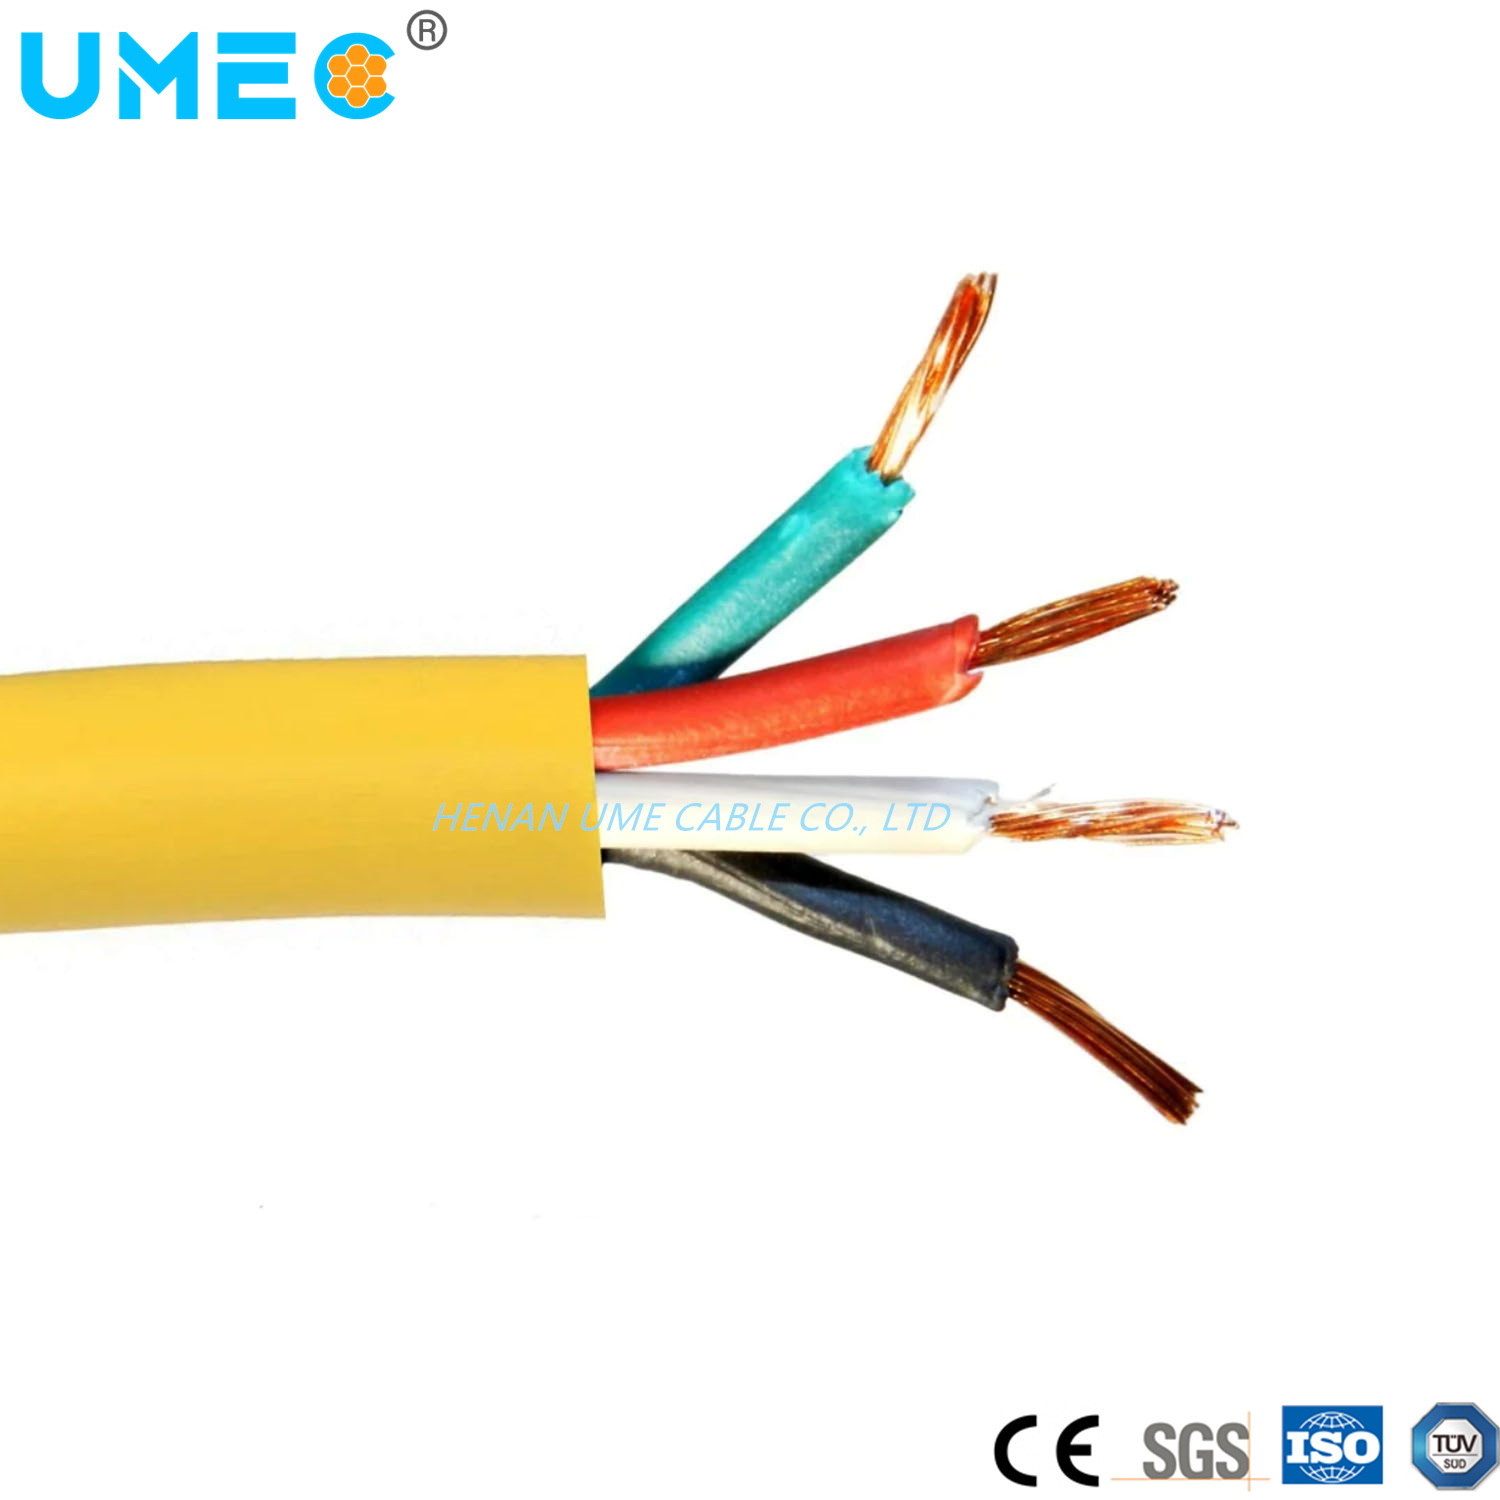 Customized Oil and Water Resistant Thermoplastic Elastomer Rubber Cable 450/750V Flexible Power Rubber Cable 8/3 2/4 12/5AWG Price